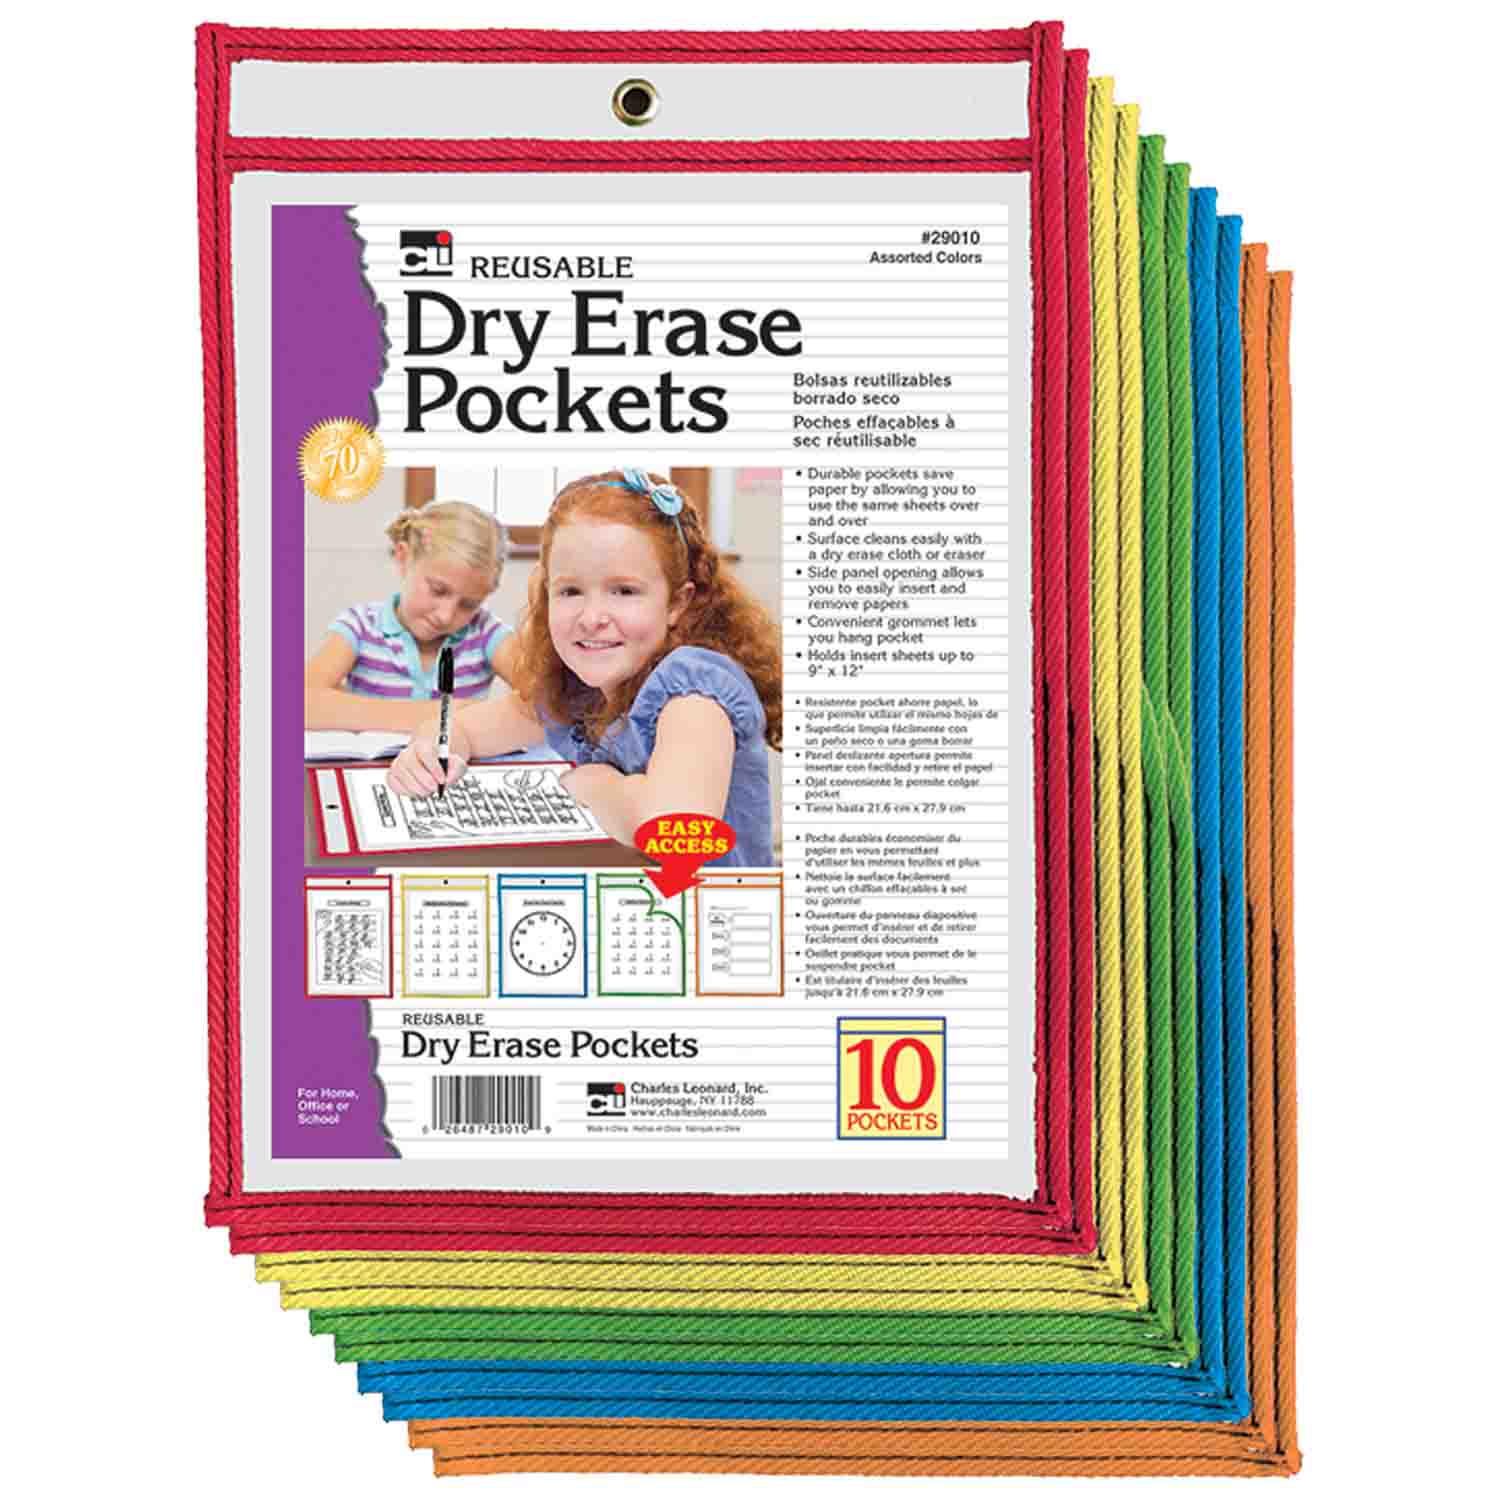 ALIGADO 40 Pack Dry Erase Pockets for Office Classroom Supplies Assorted Colors Write and Wipe Reusable Letter Size 